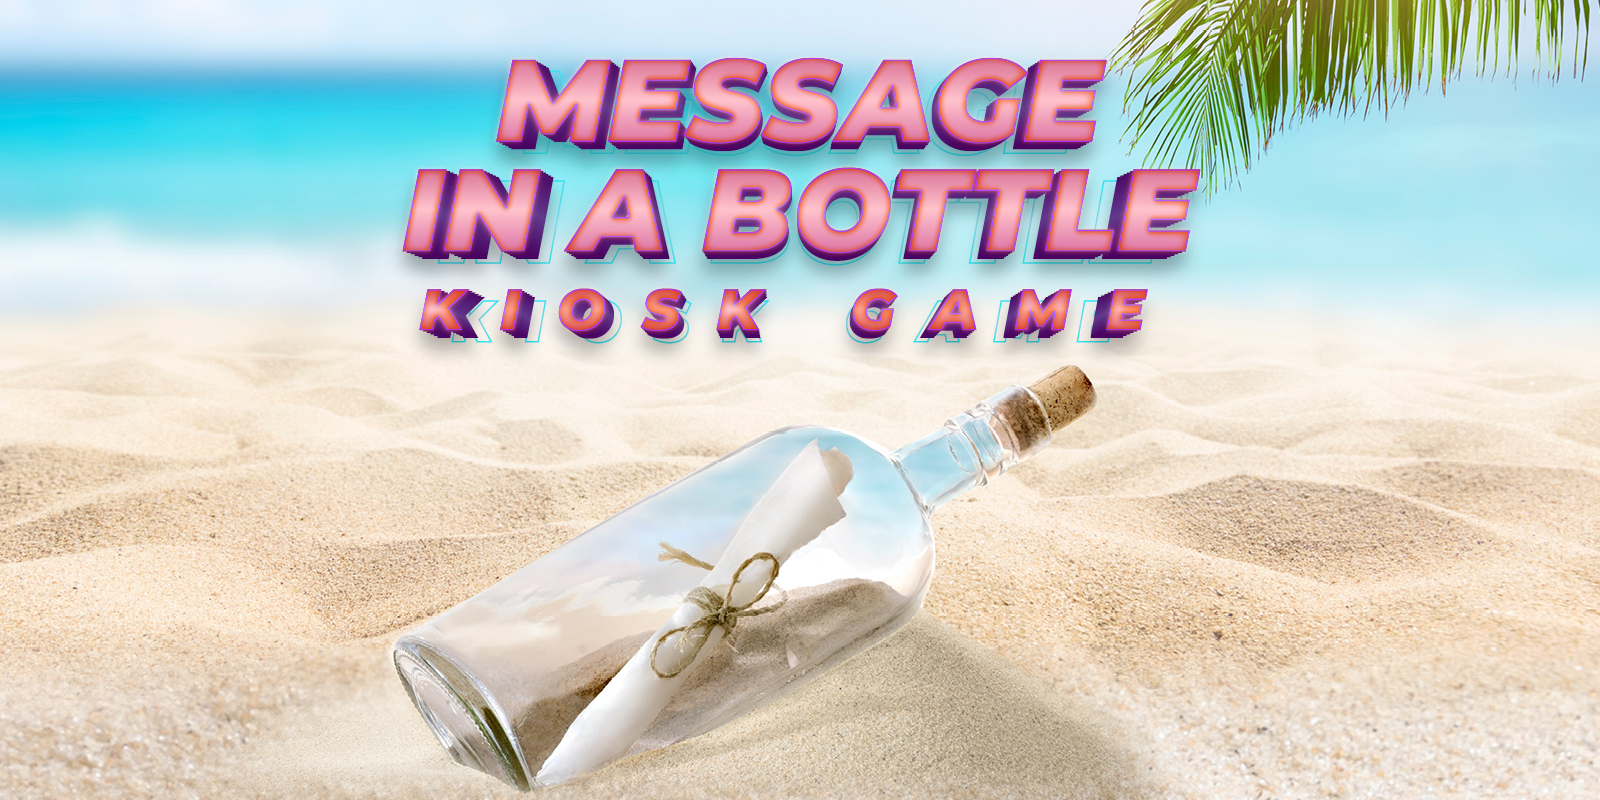 Message In A Bottle Kiosk Game creatives showing a note in a glass bottle on the beach